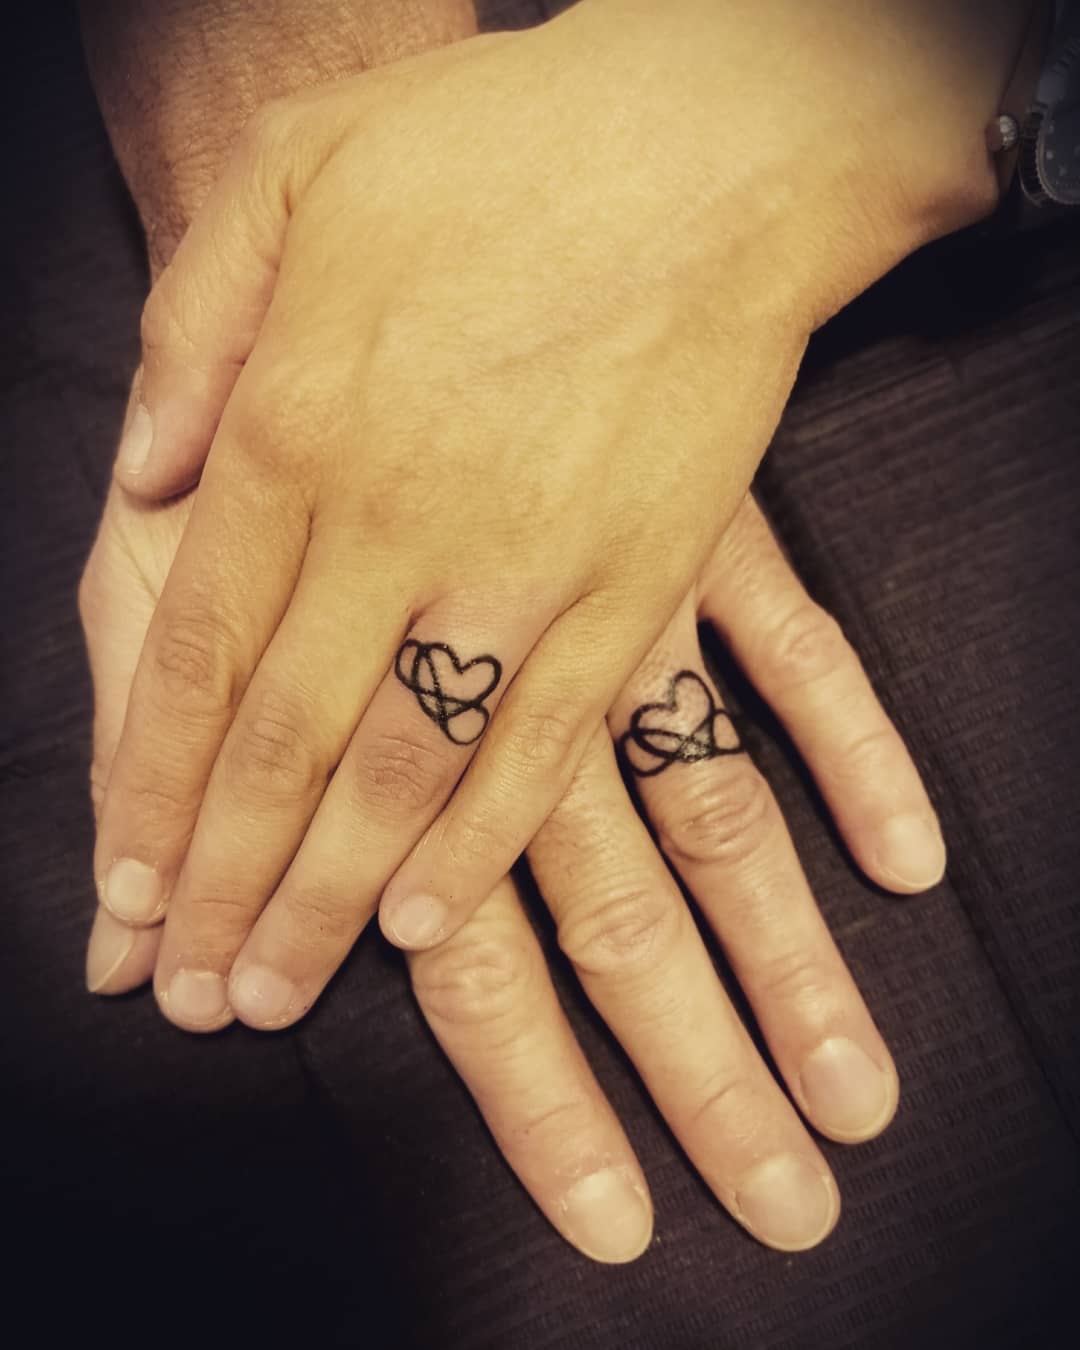 51 Wedding Ring Tattoo Ideas That Would Make Your Ring Finger Look ...